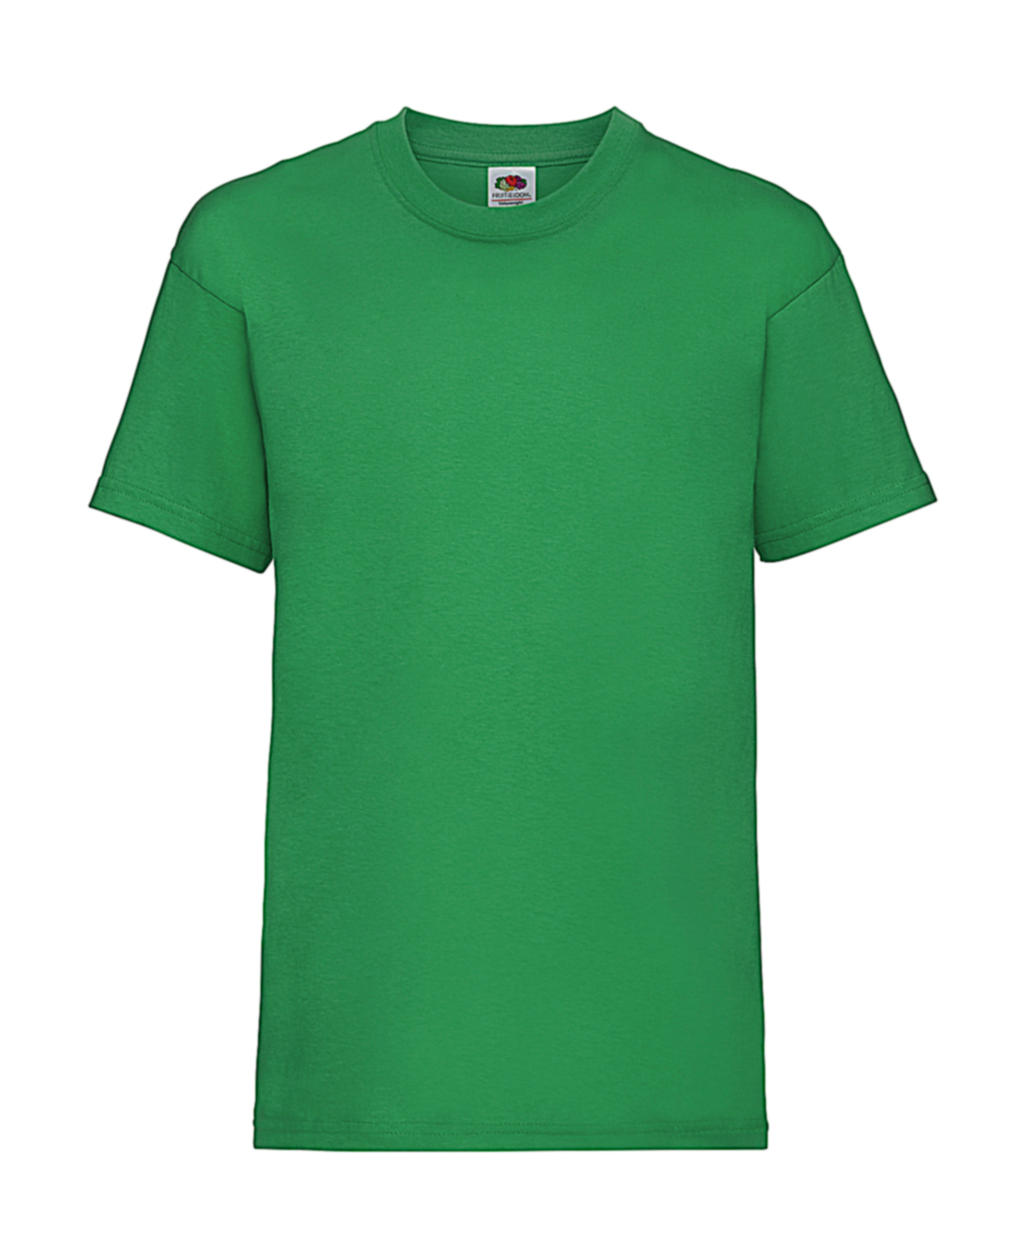  Kids Valueweight T in Farbe Kelly Green